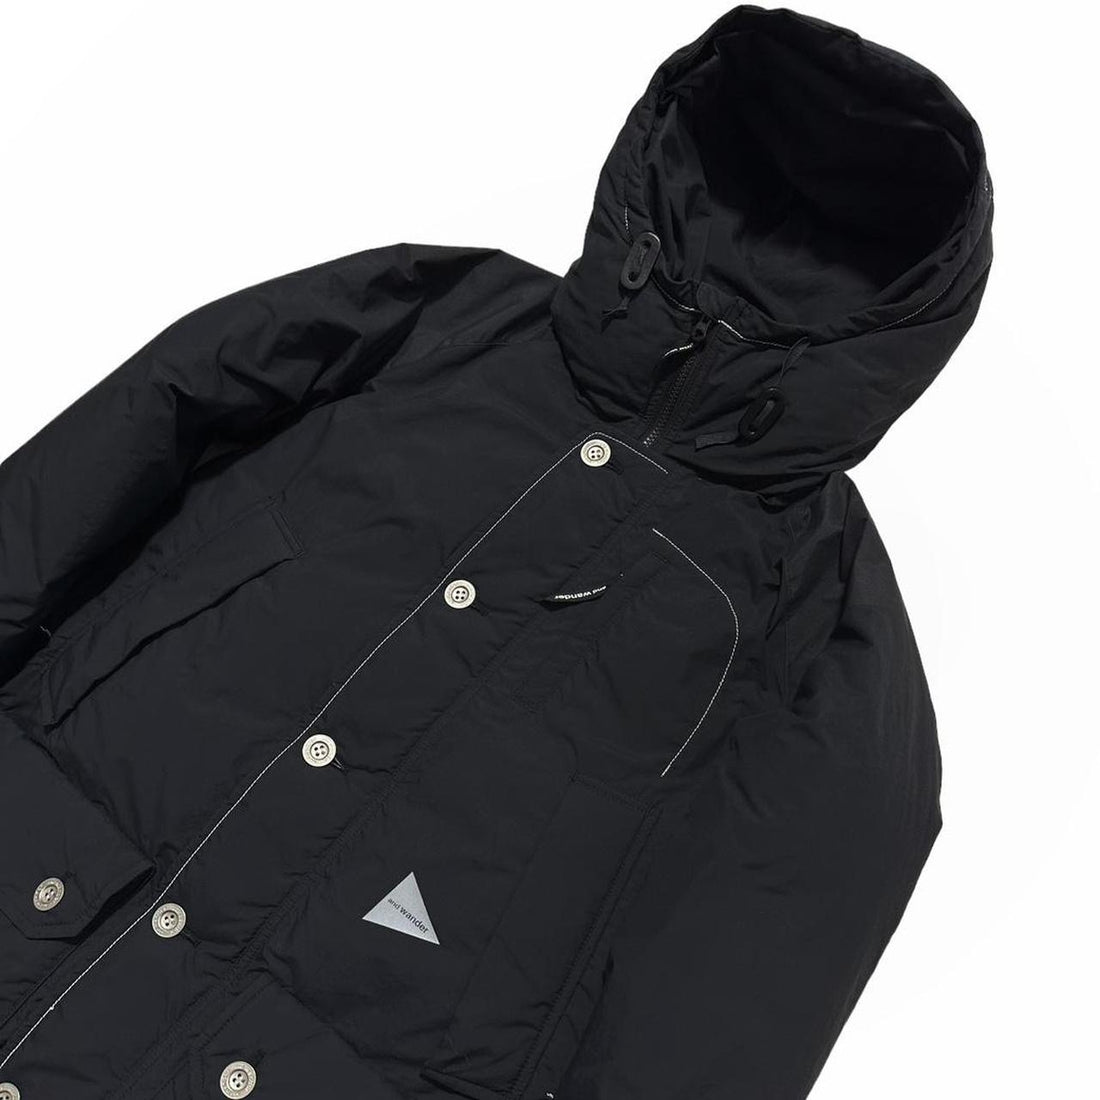 And Wander Pertex Unlimited Black Padded Down Long Jacket